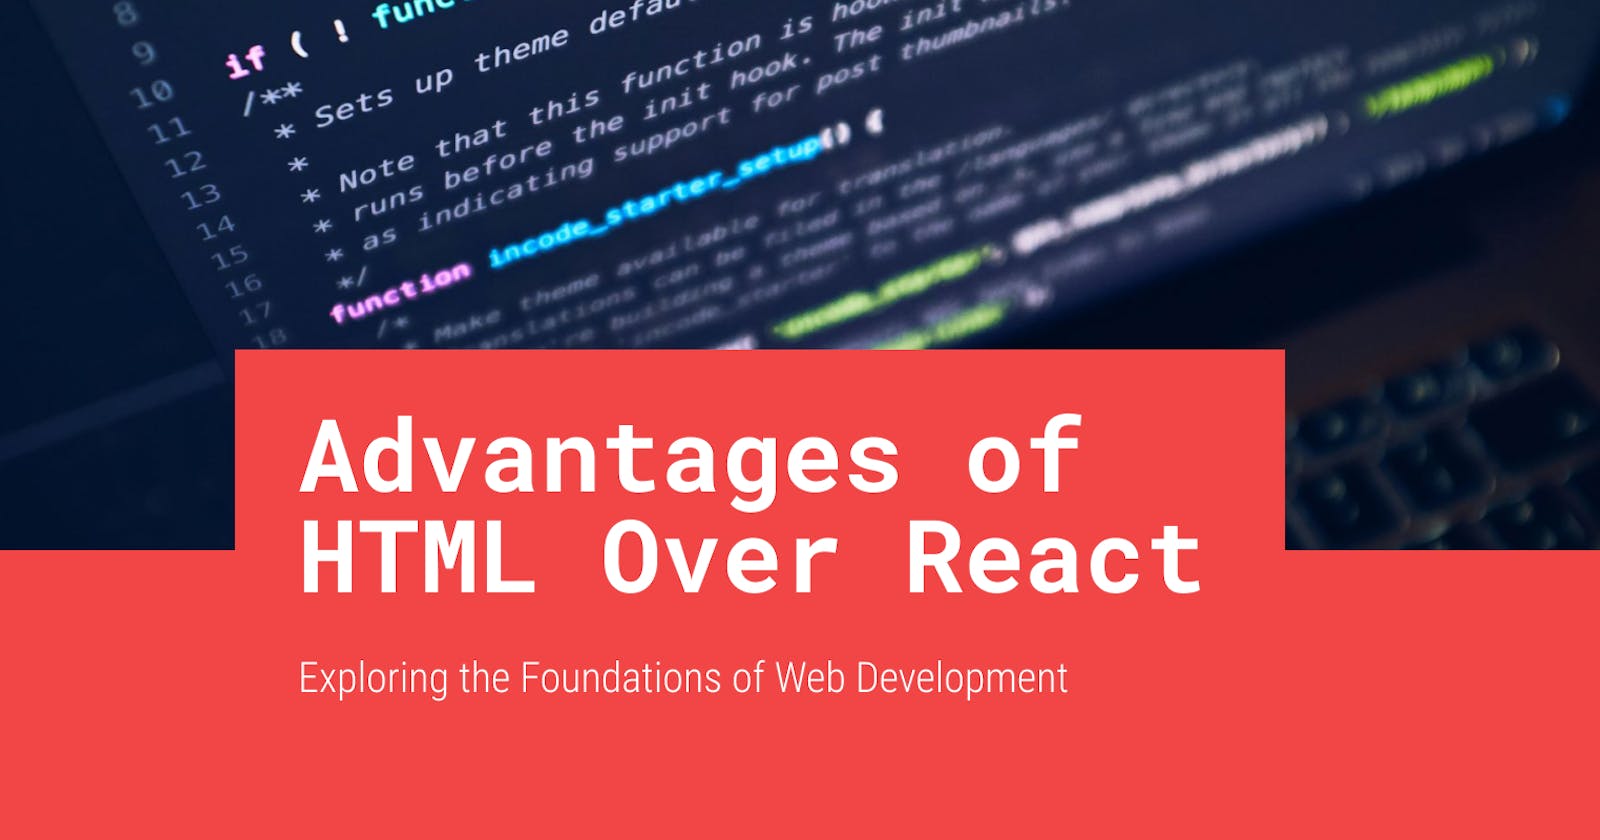 Advantages of HTML Over React: Exploring the Foundations of Web Development